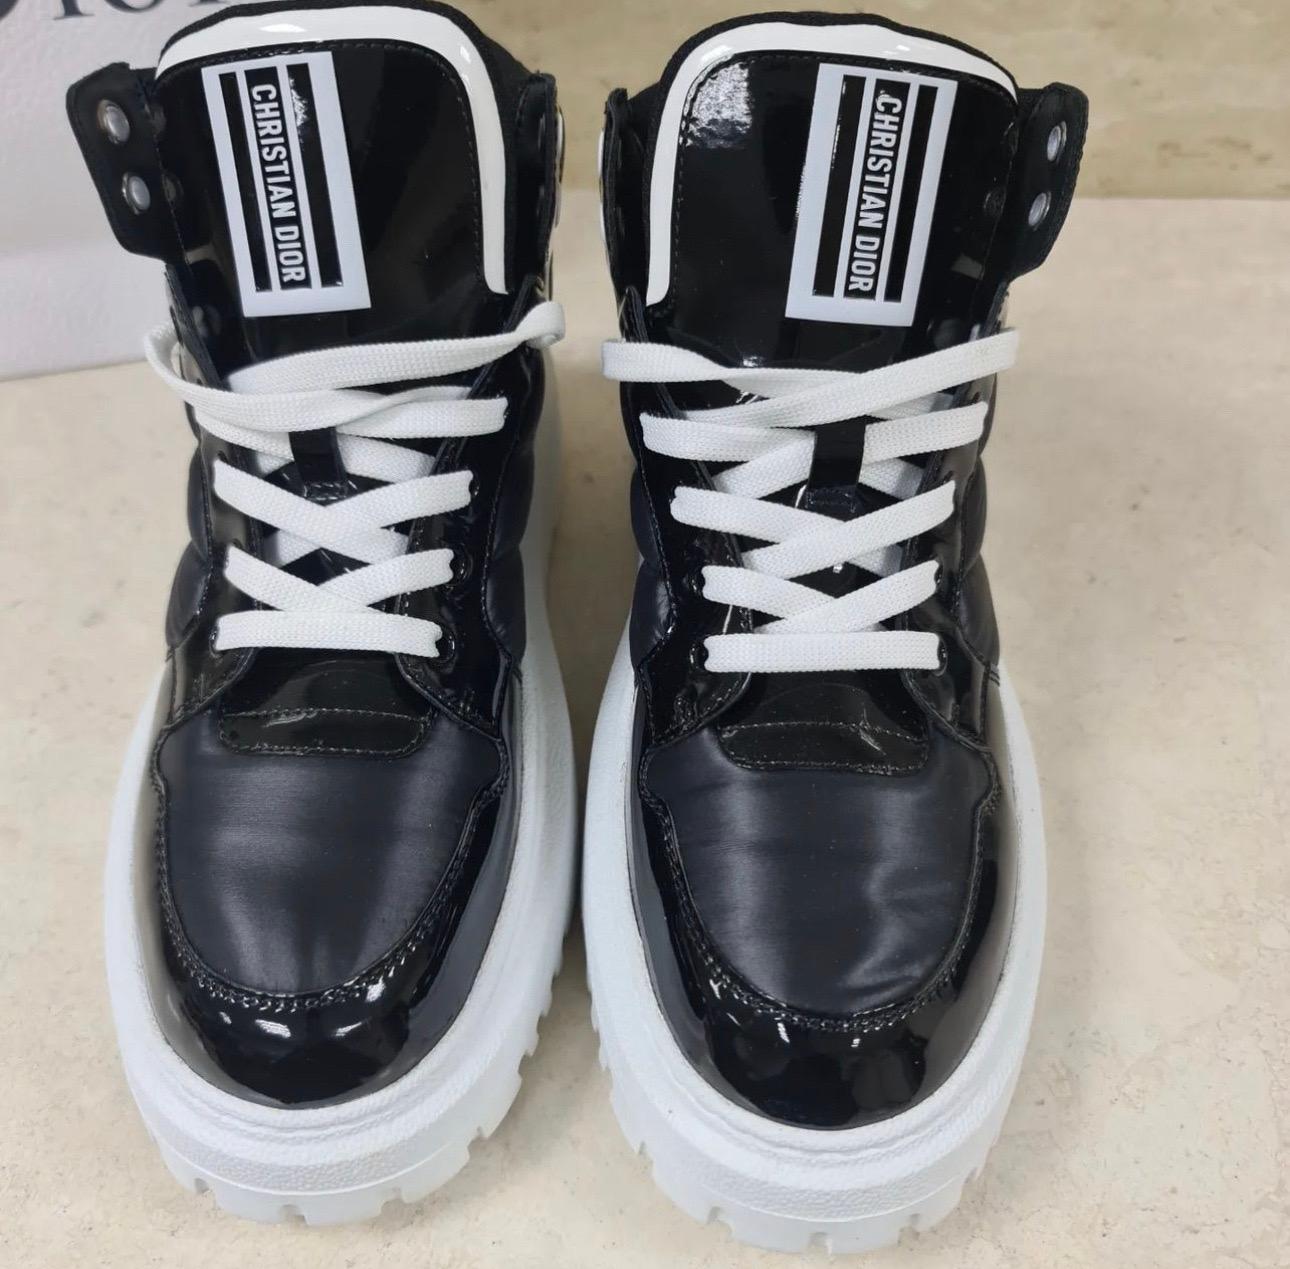 Christian Dior D-Player High Top Sneakers
Black Nylon
Graphic Print
Rubber Trim
Round-Toes
Platform
Lace-Up Closure at Uppers
Sz.38
No box. No dust bag.